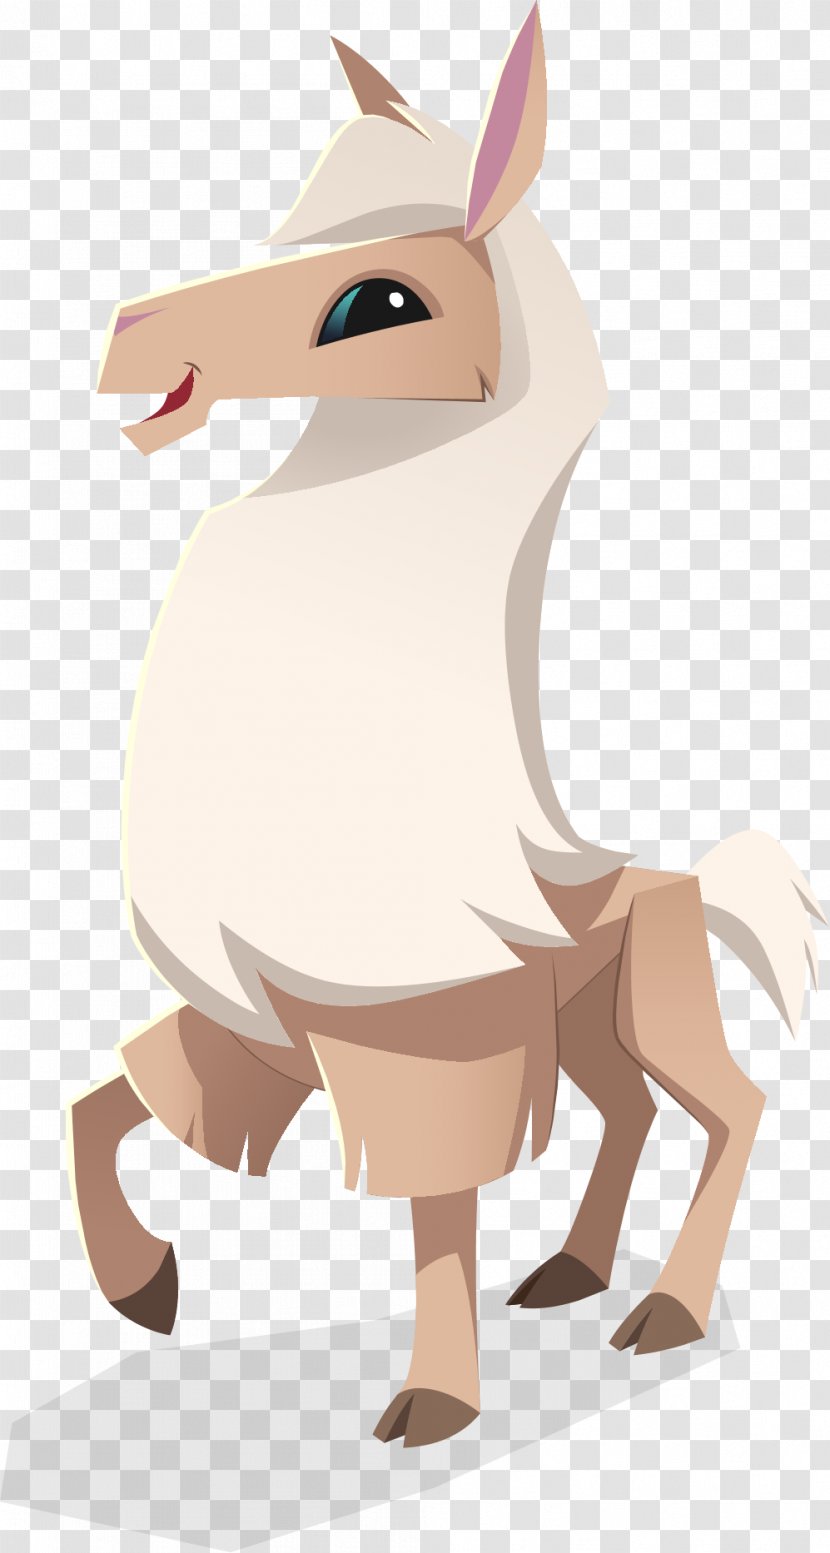 Animal Jam Schnoodle Llama Flat-Coated Retriever Gray Wolf - Flatcoated Transparent PNG